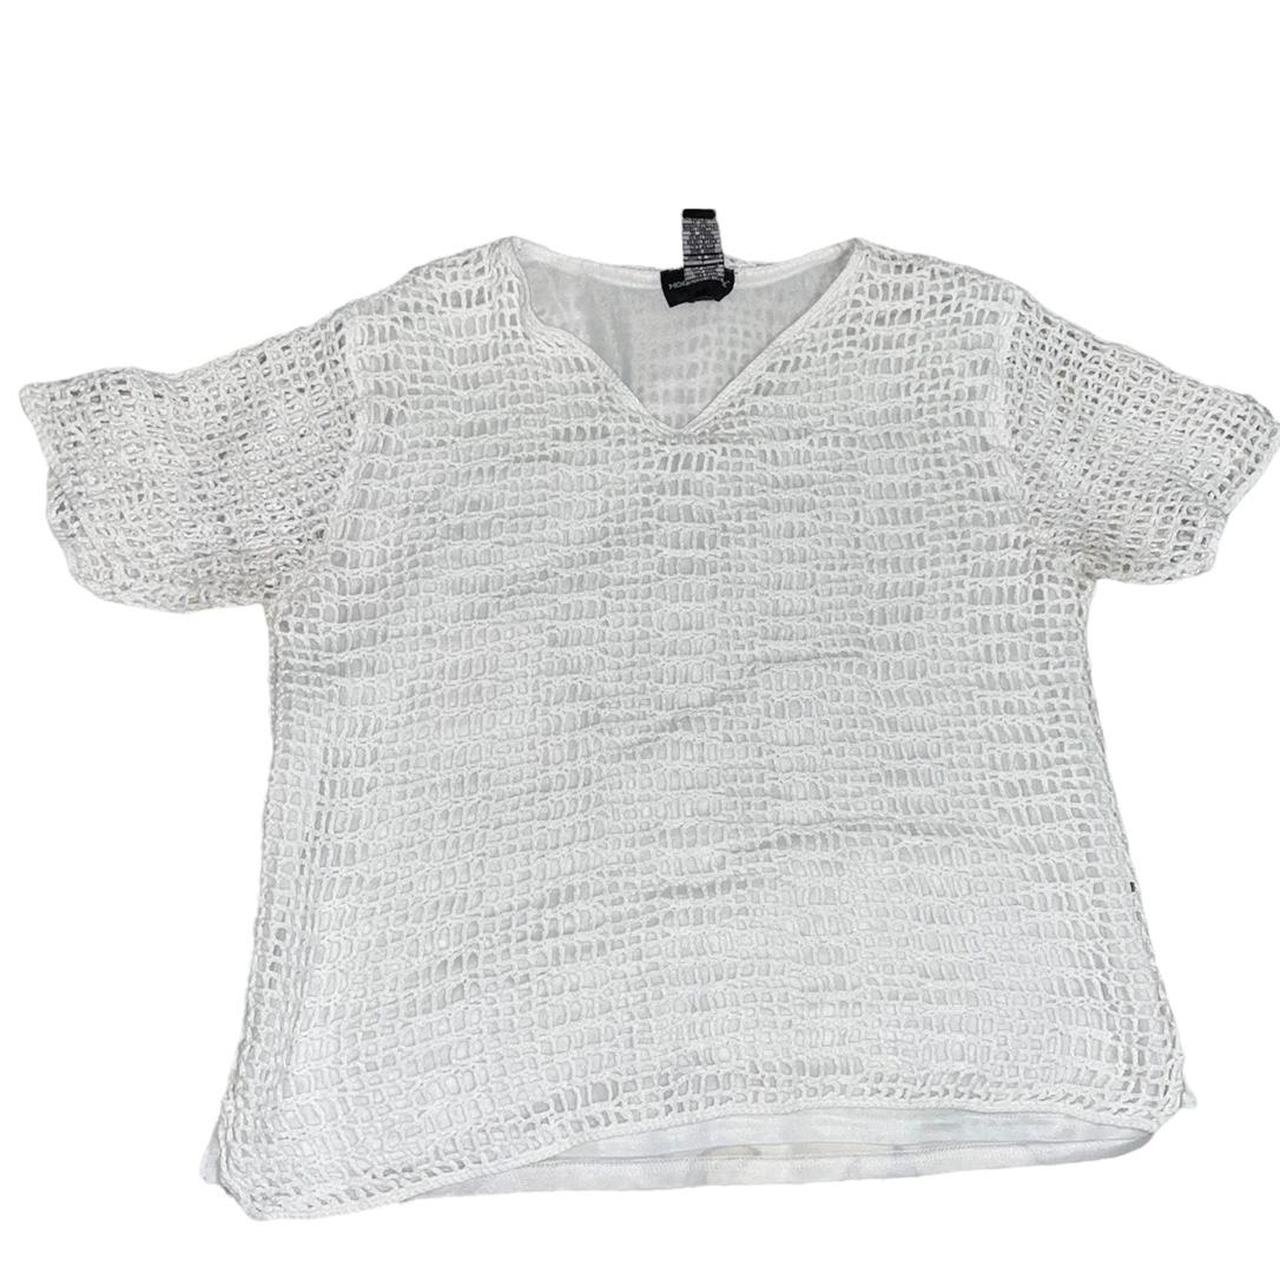 Product Image 2 - White Knit Top

It has two